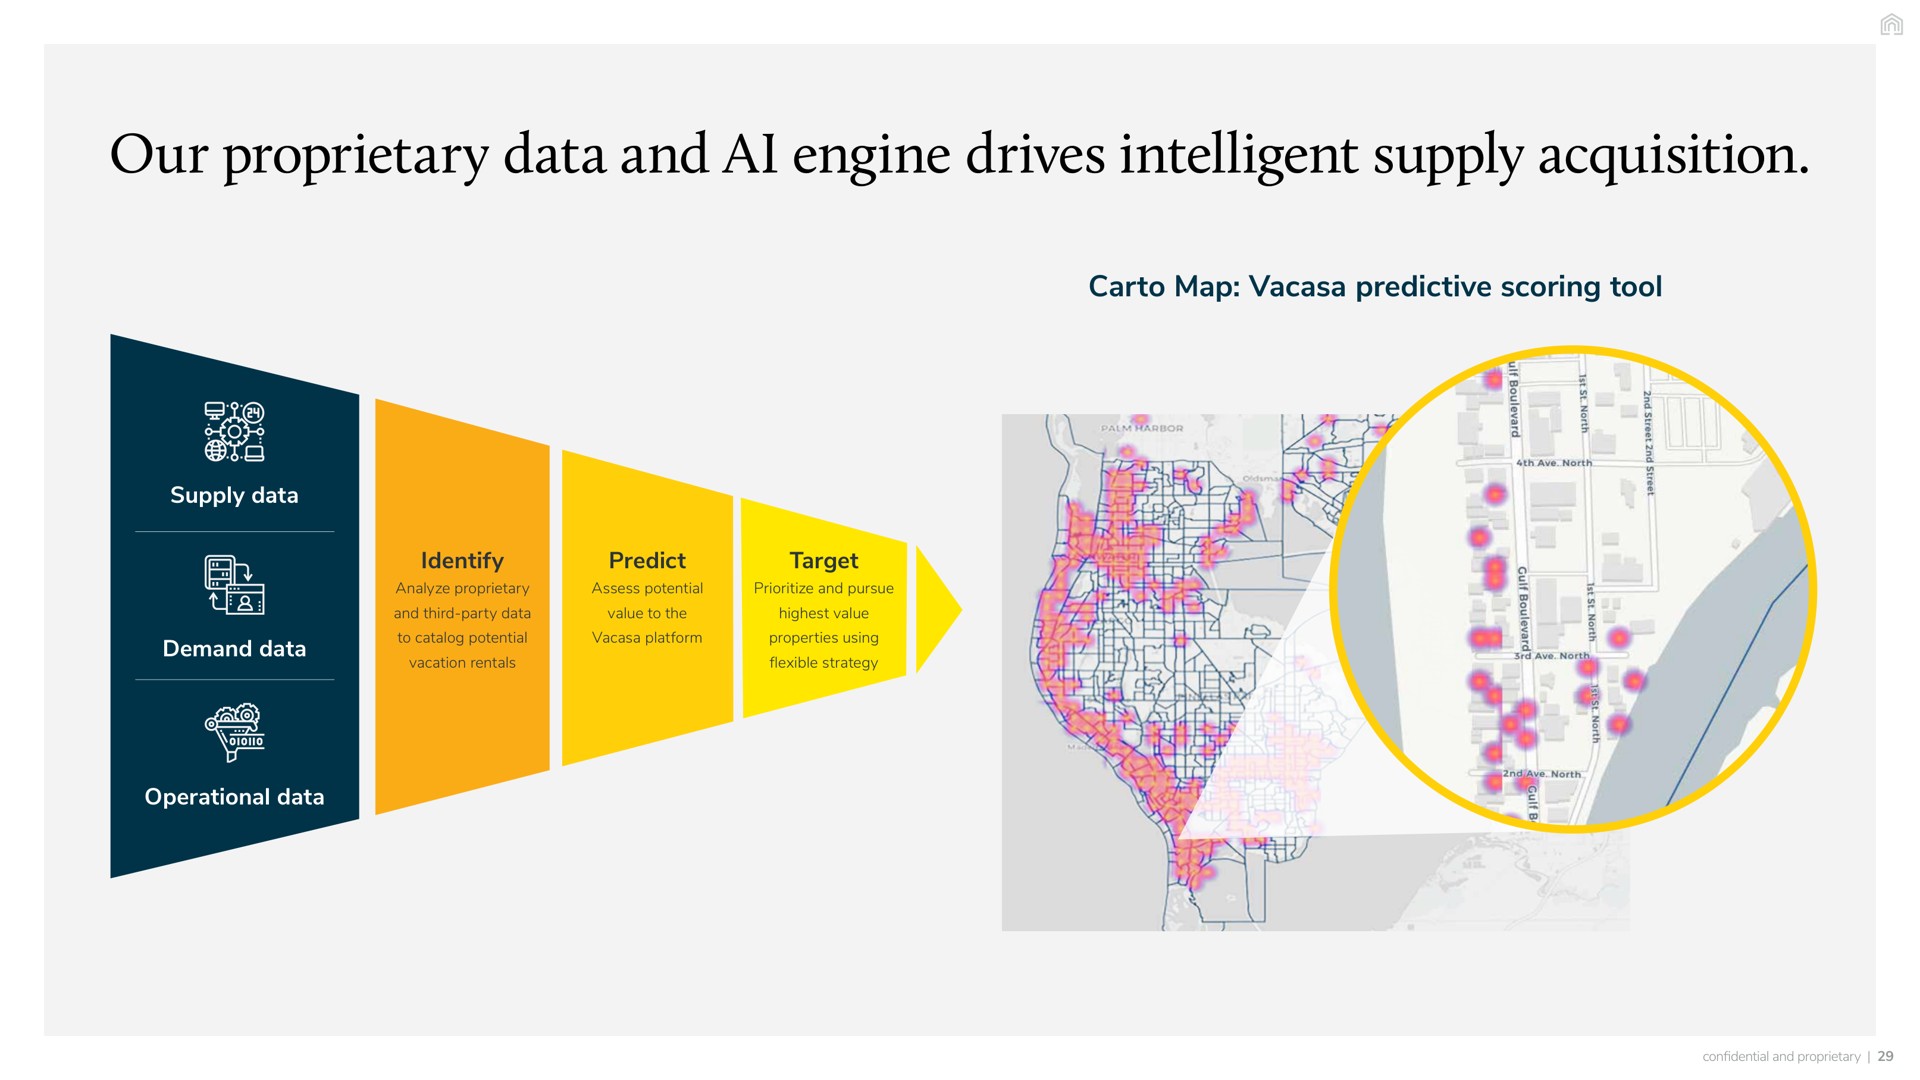 our proprietary data and engine drives intelligent supply acquisition map predictive scoring tool operational target pursue identify analyze predict assess potential demand i nit third party to potential platform properties using flexible strategy vacation rentals highest value value to the a a a a north | Vacasa